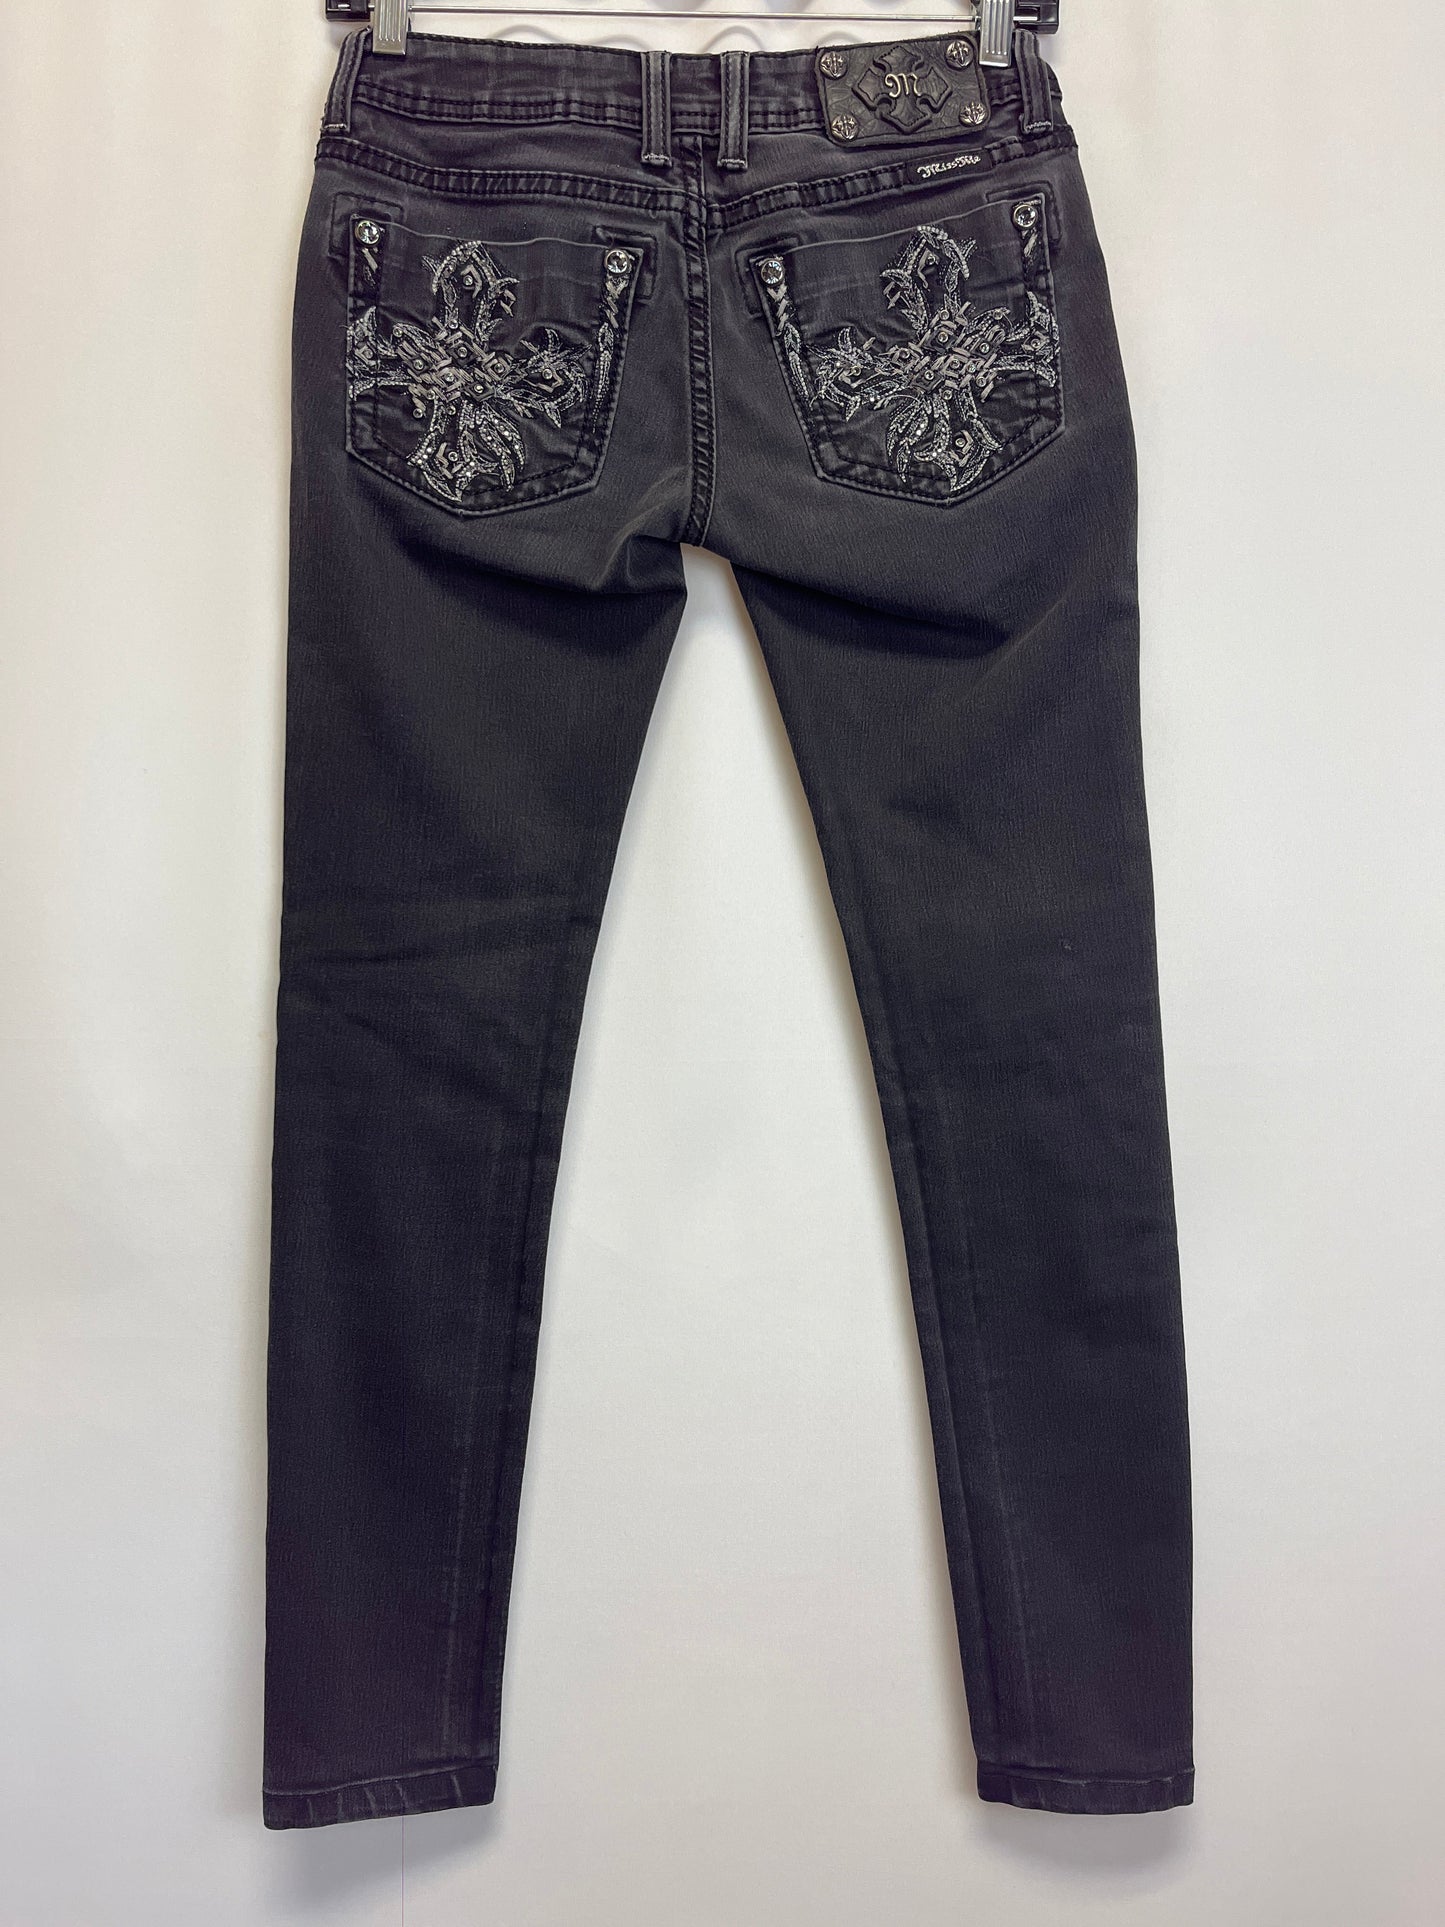 Jeans Skinny By Miss Me  Size: 0